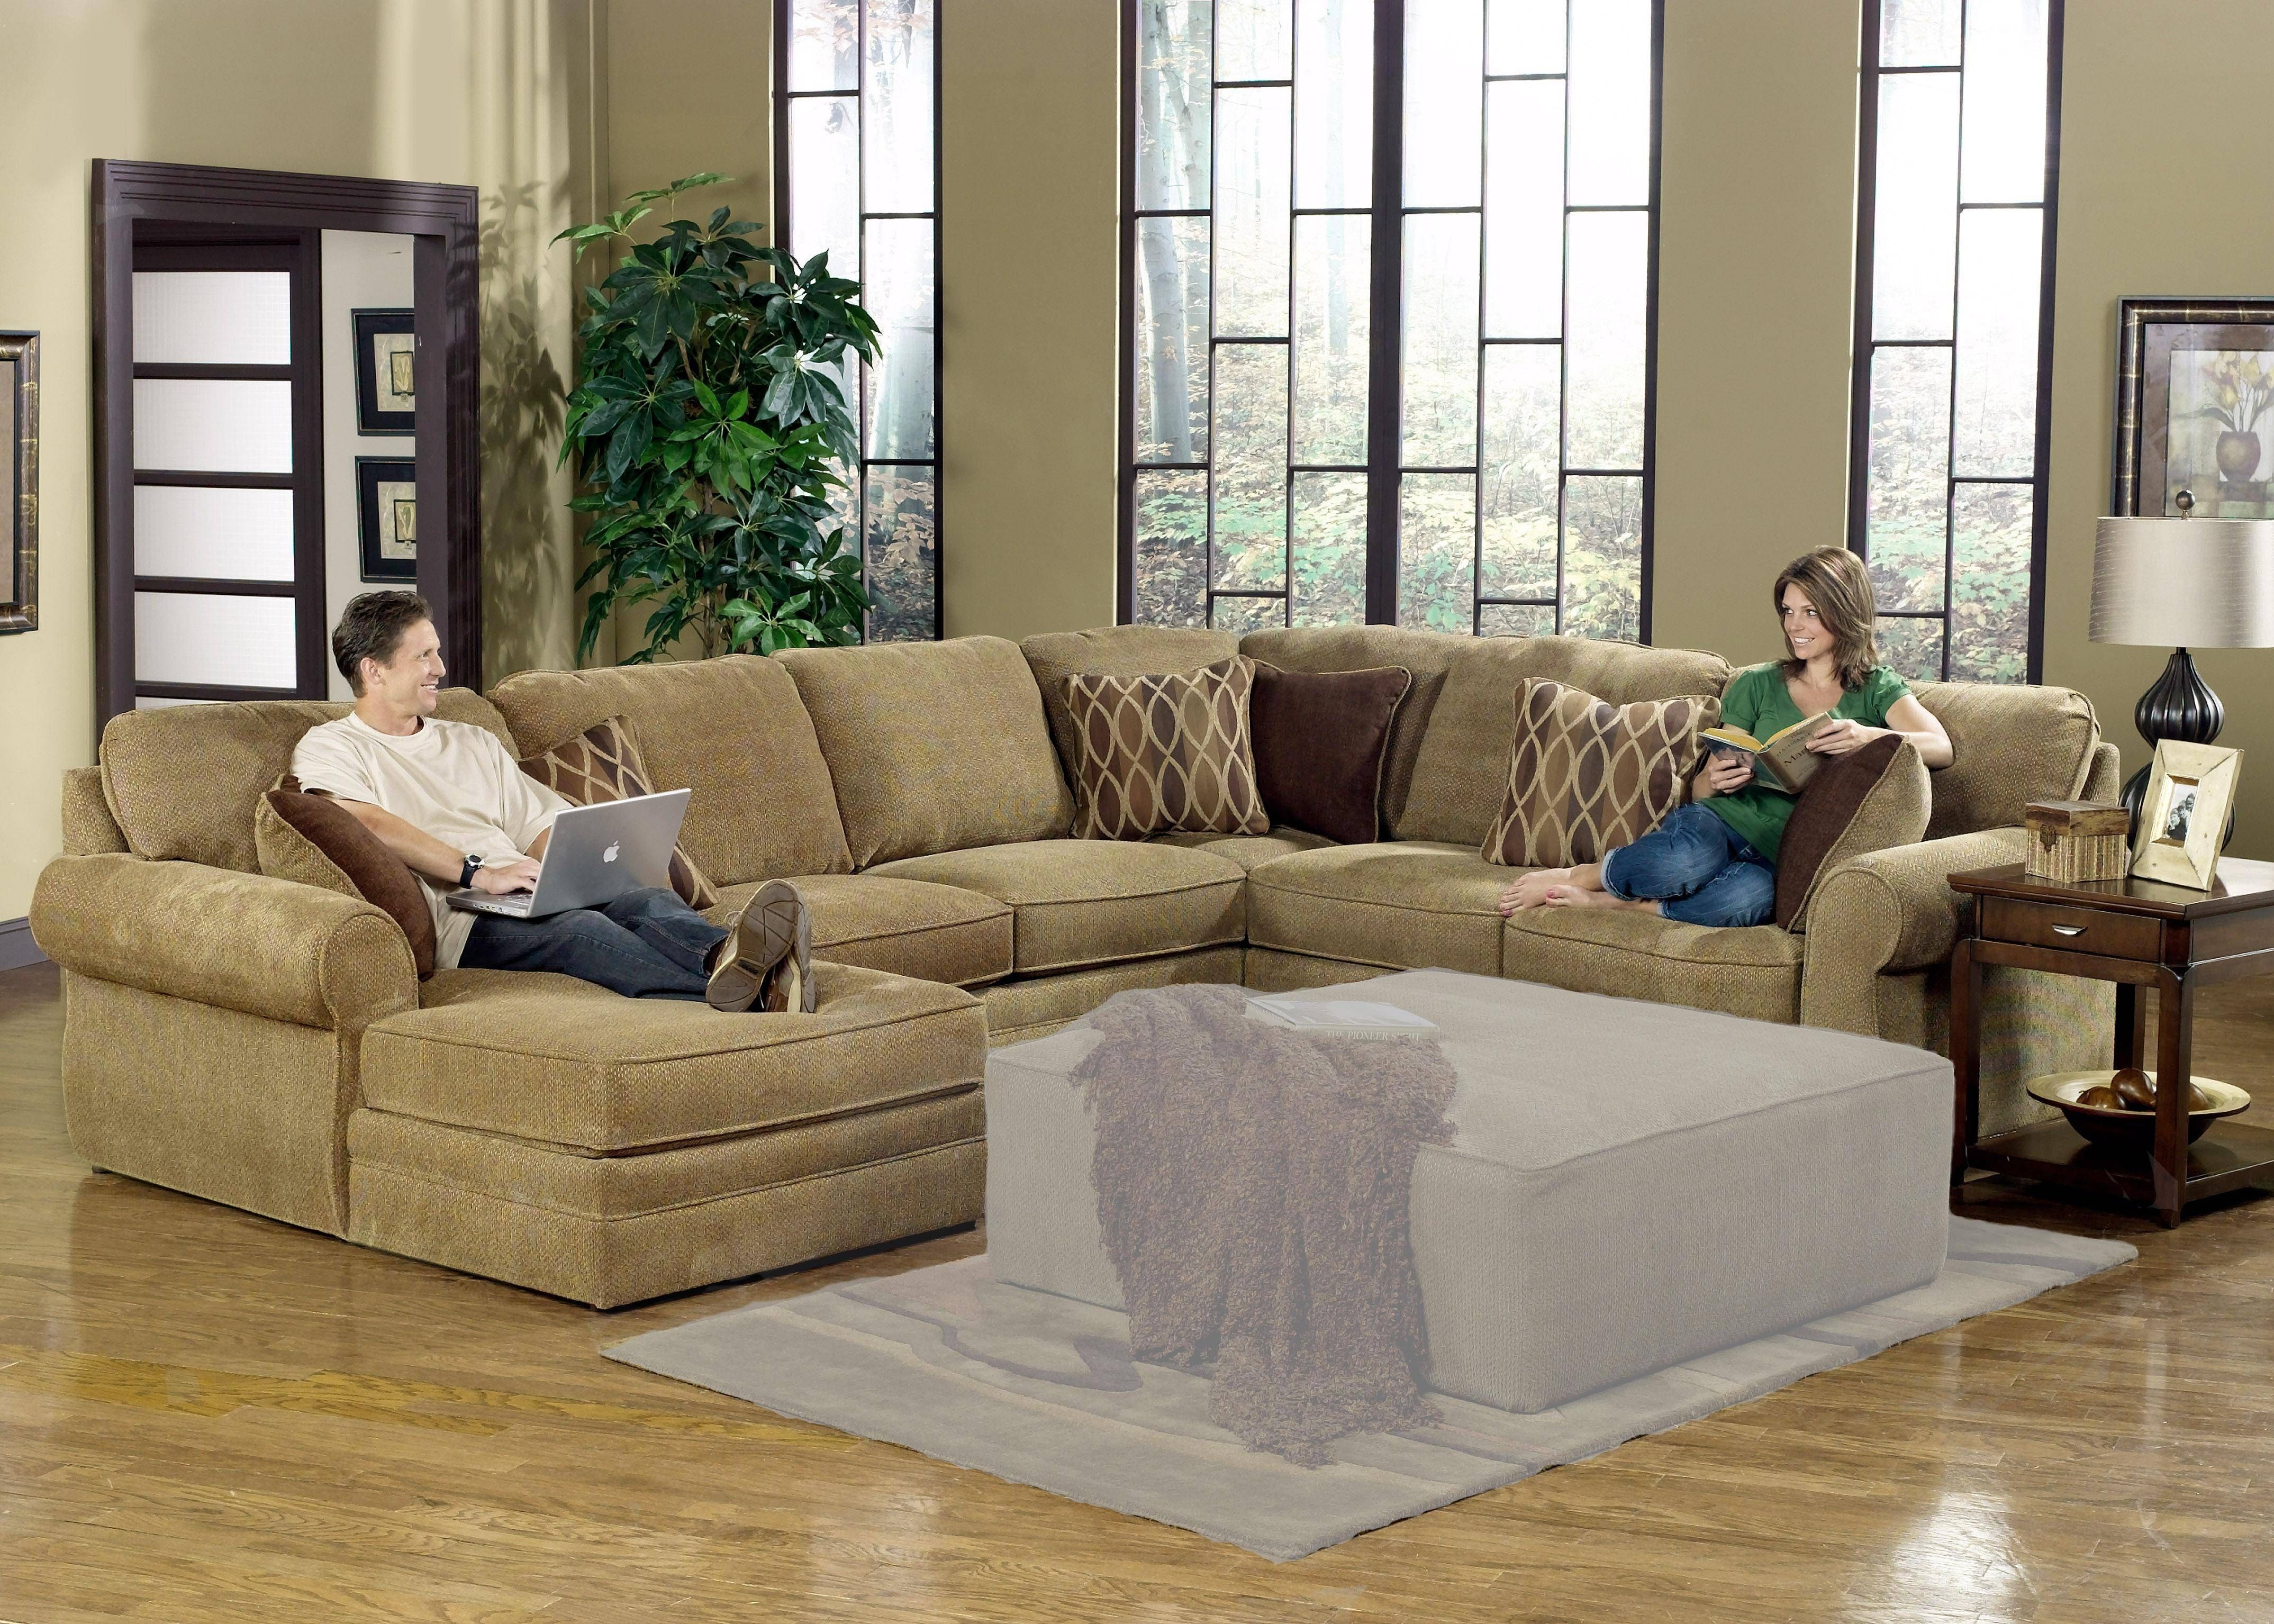 79 Exciting Large Sectional Sofas With Recliners Home Design | Hoozoo Throughout Florence Large Sofas (View 25 of 30)